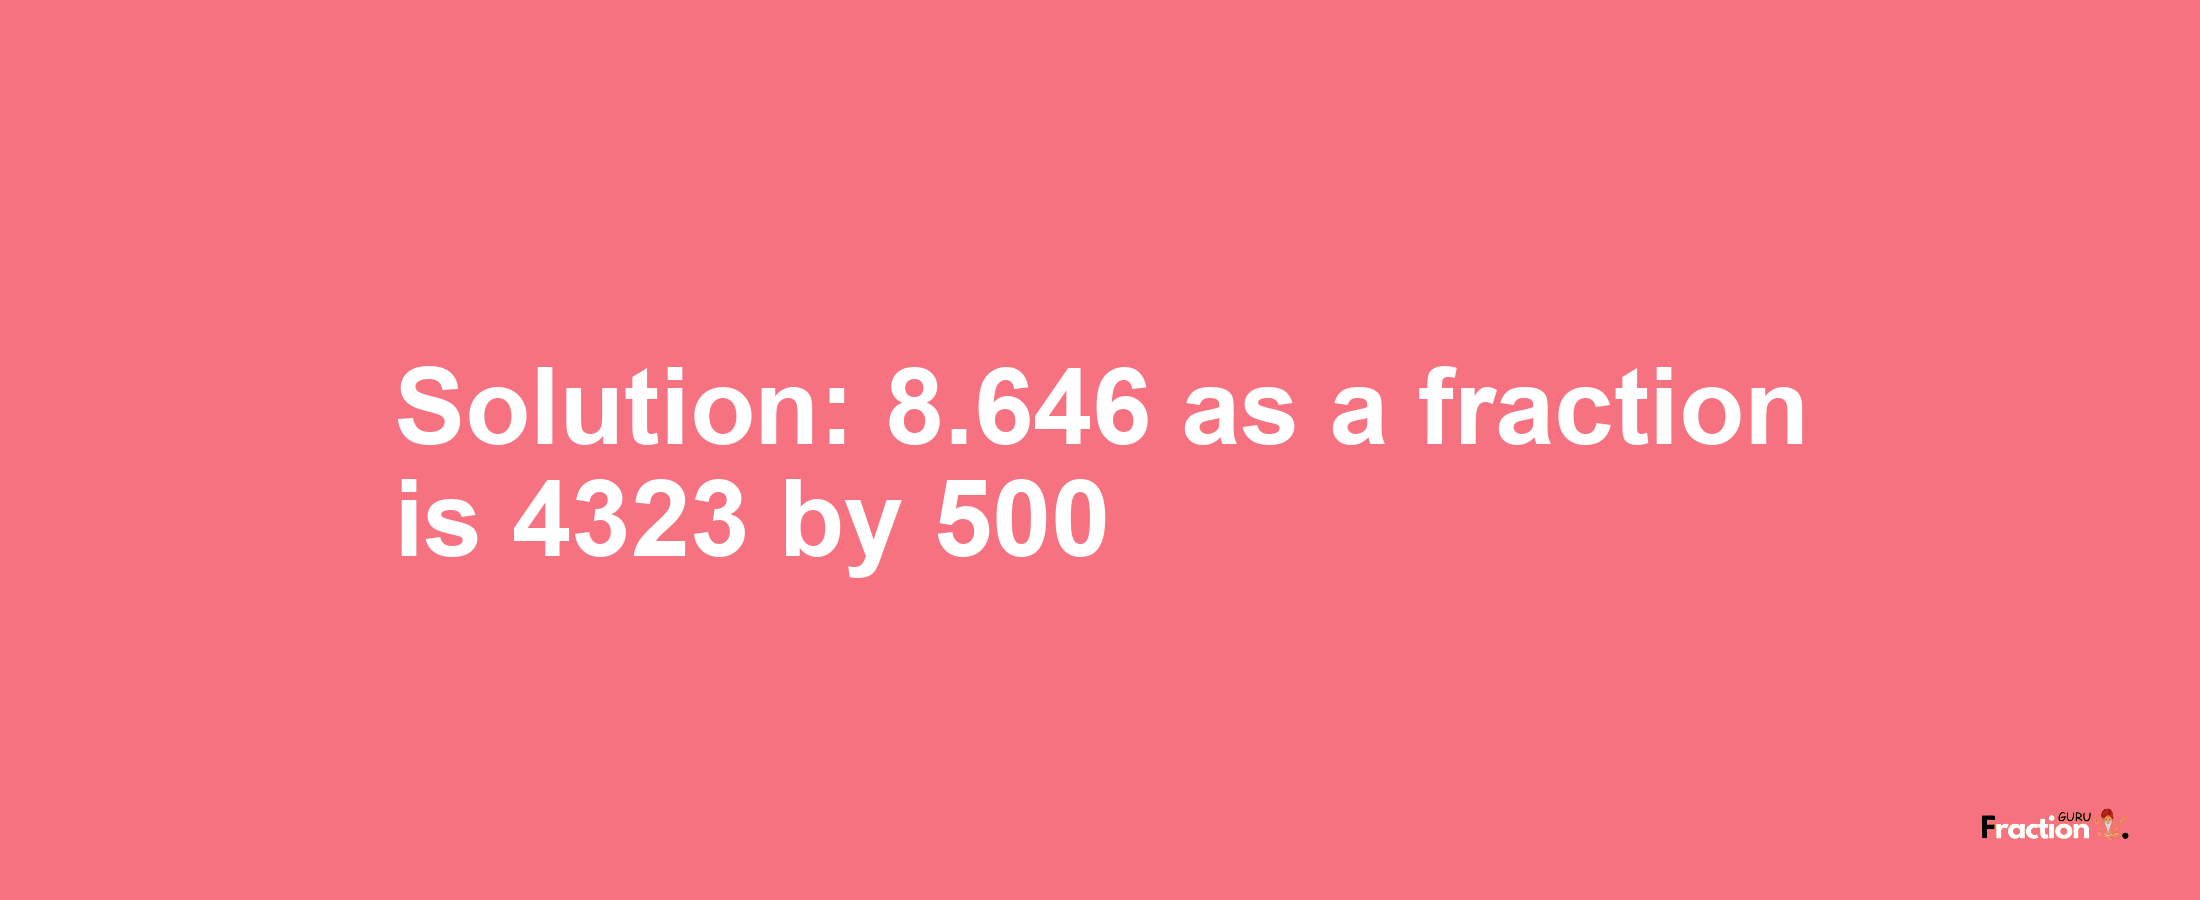 Solution:8.646 as a fraction is 4323/500